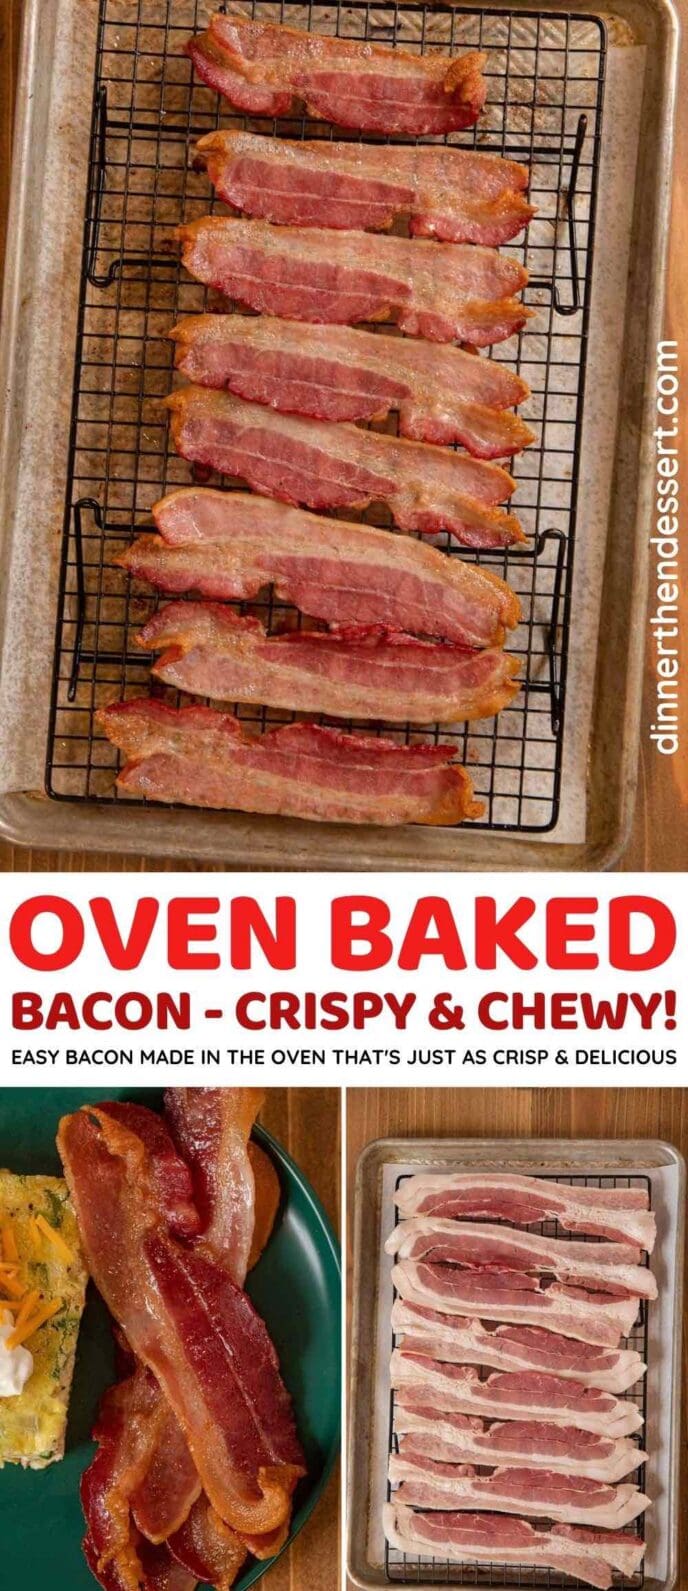 Oven-baked Bacon collage